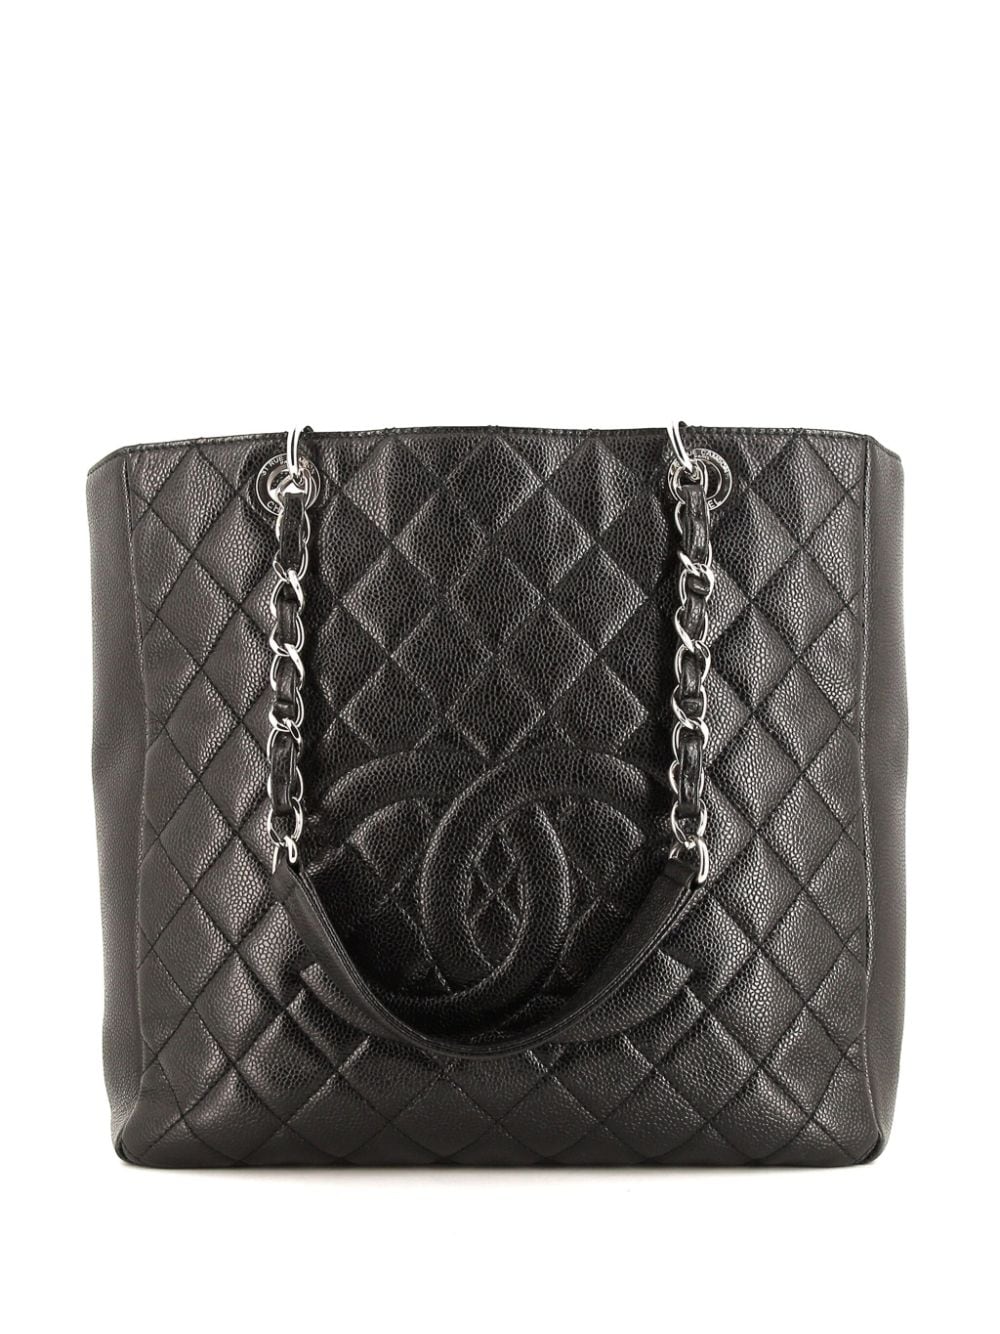 Pre-owned Chanel 2013 Grand Shopping Tote In Black